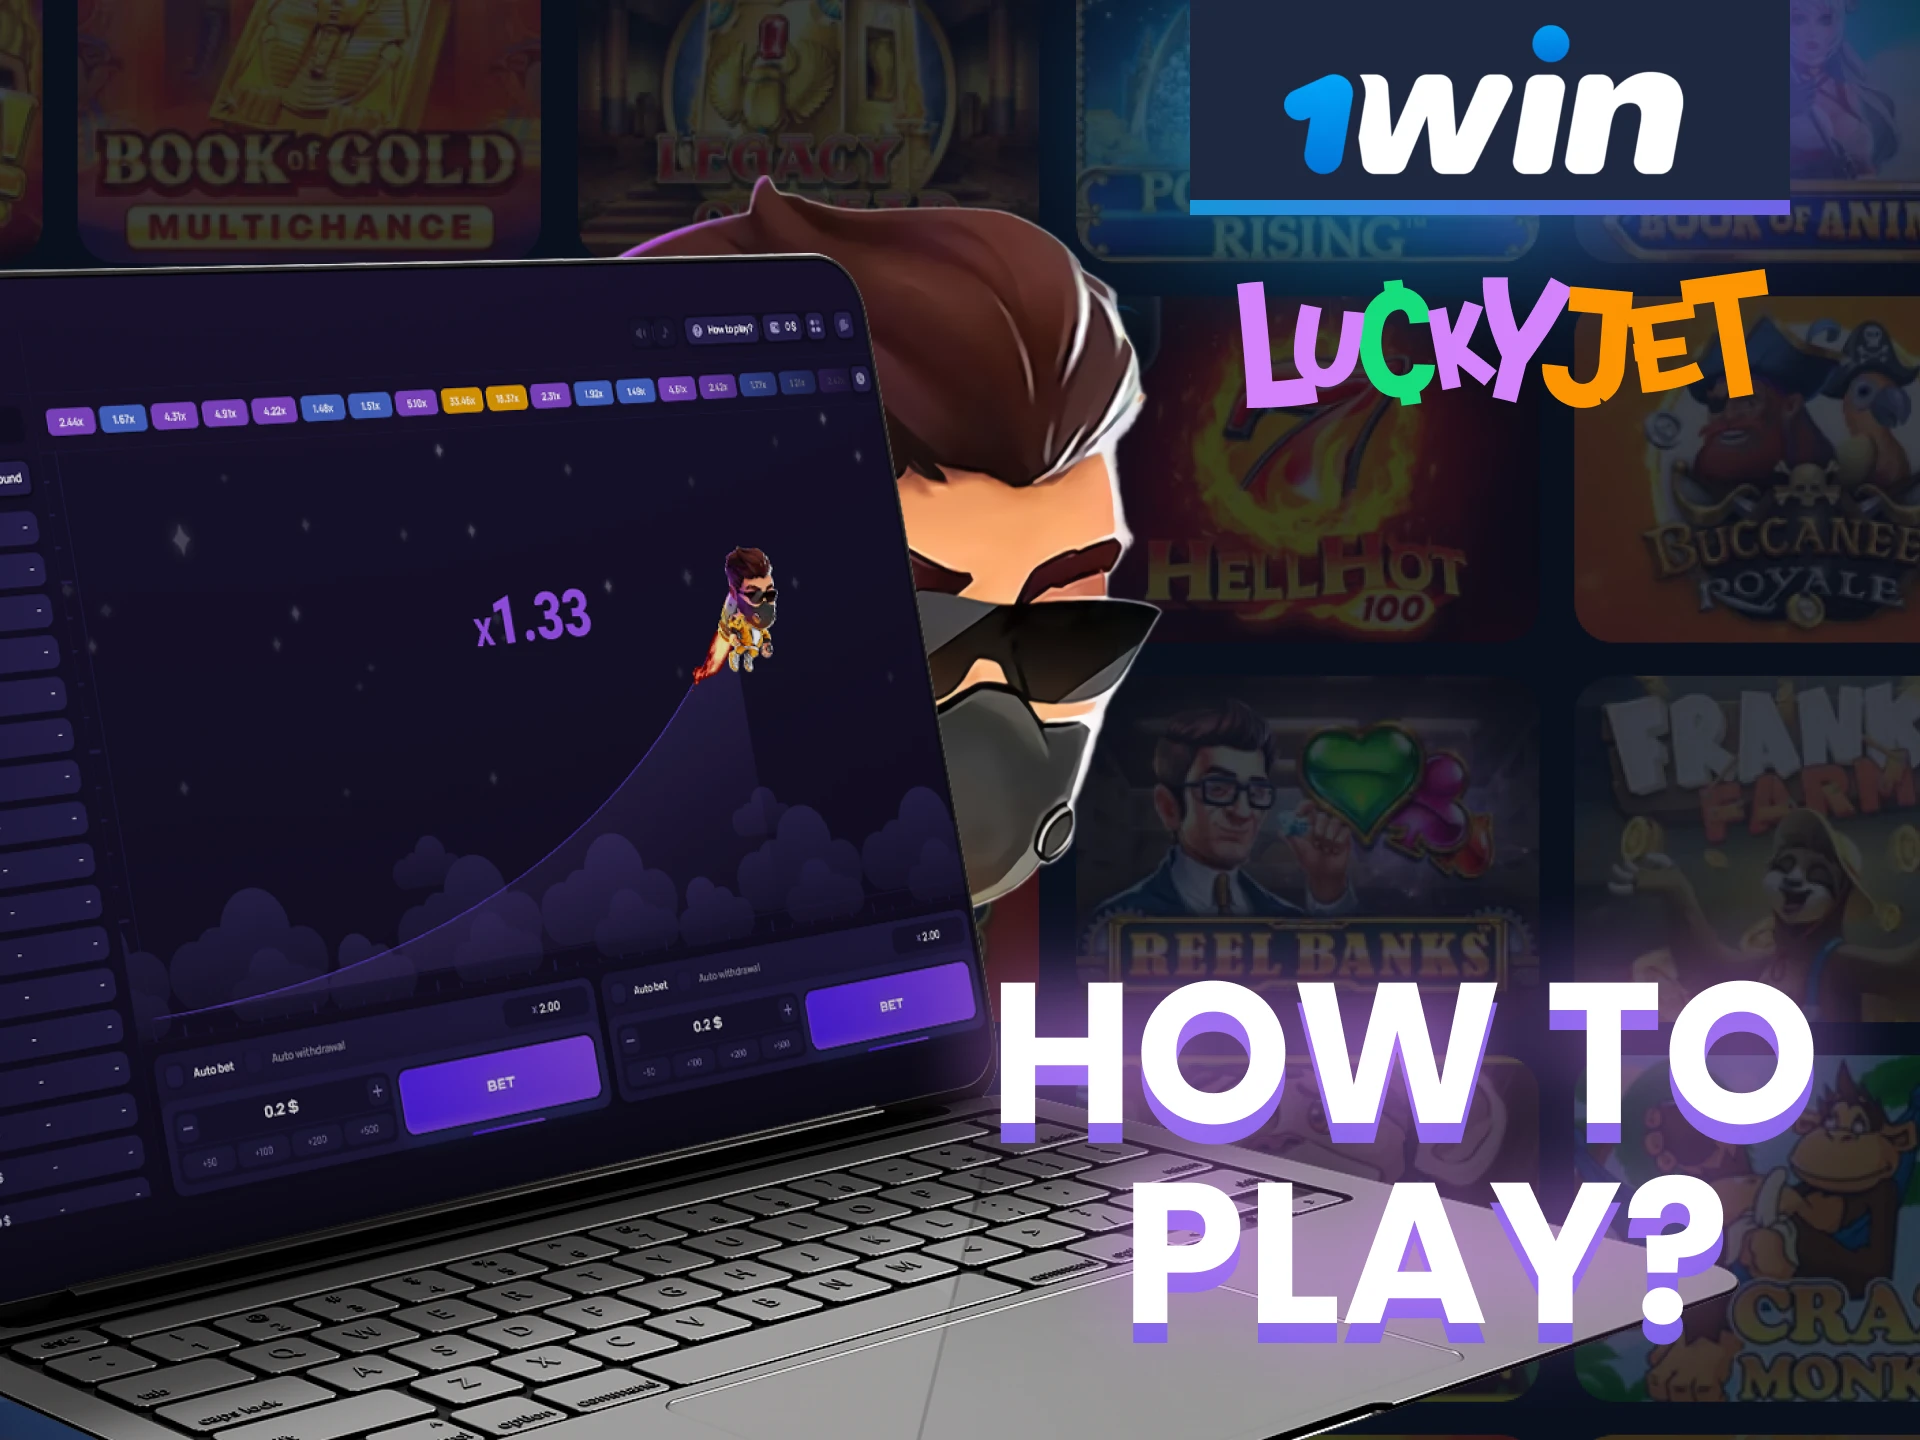 Go to the casino section to play 1win Lucky Jet.